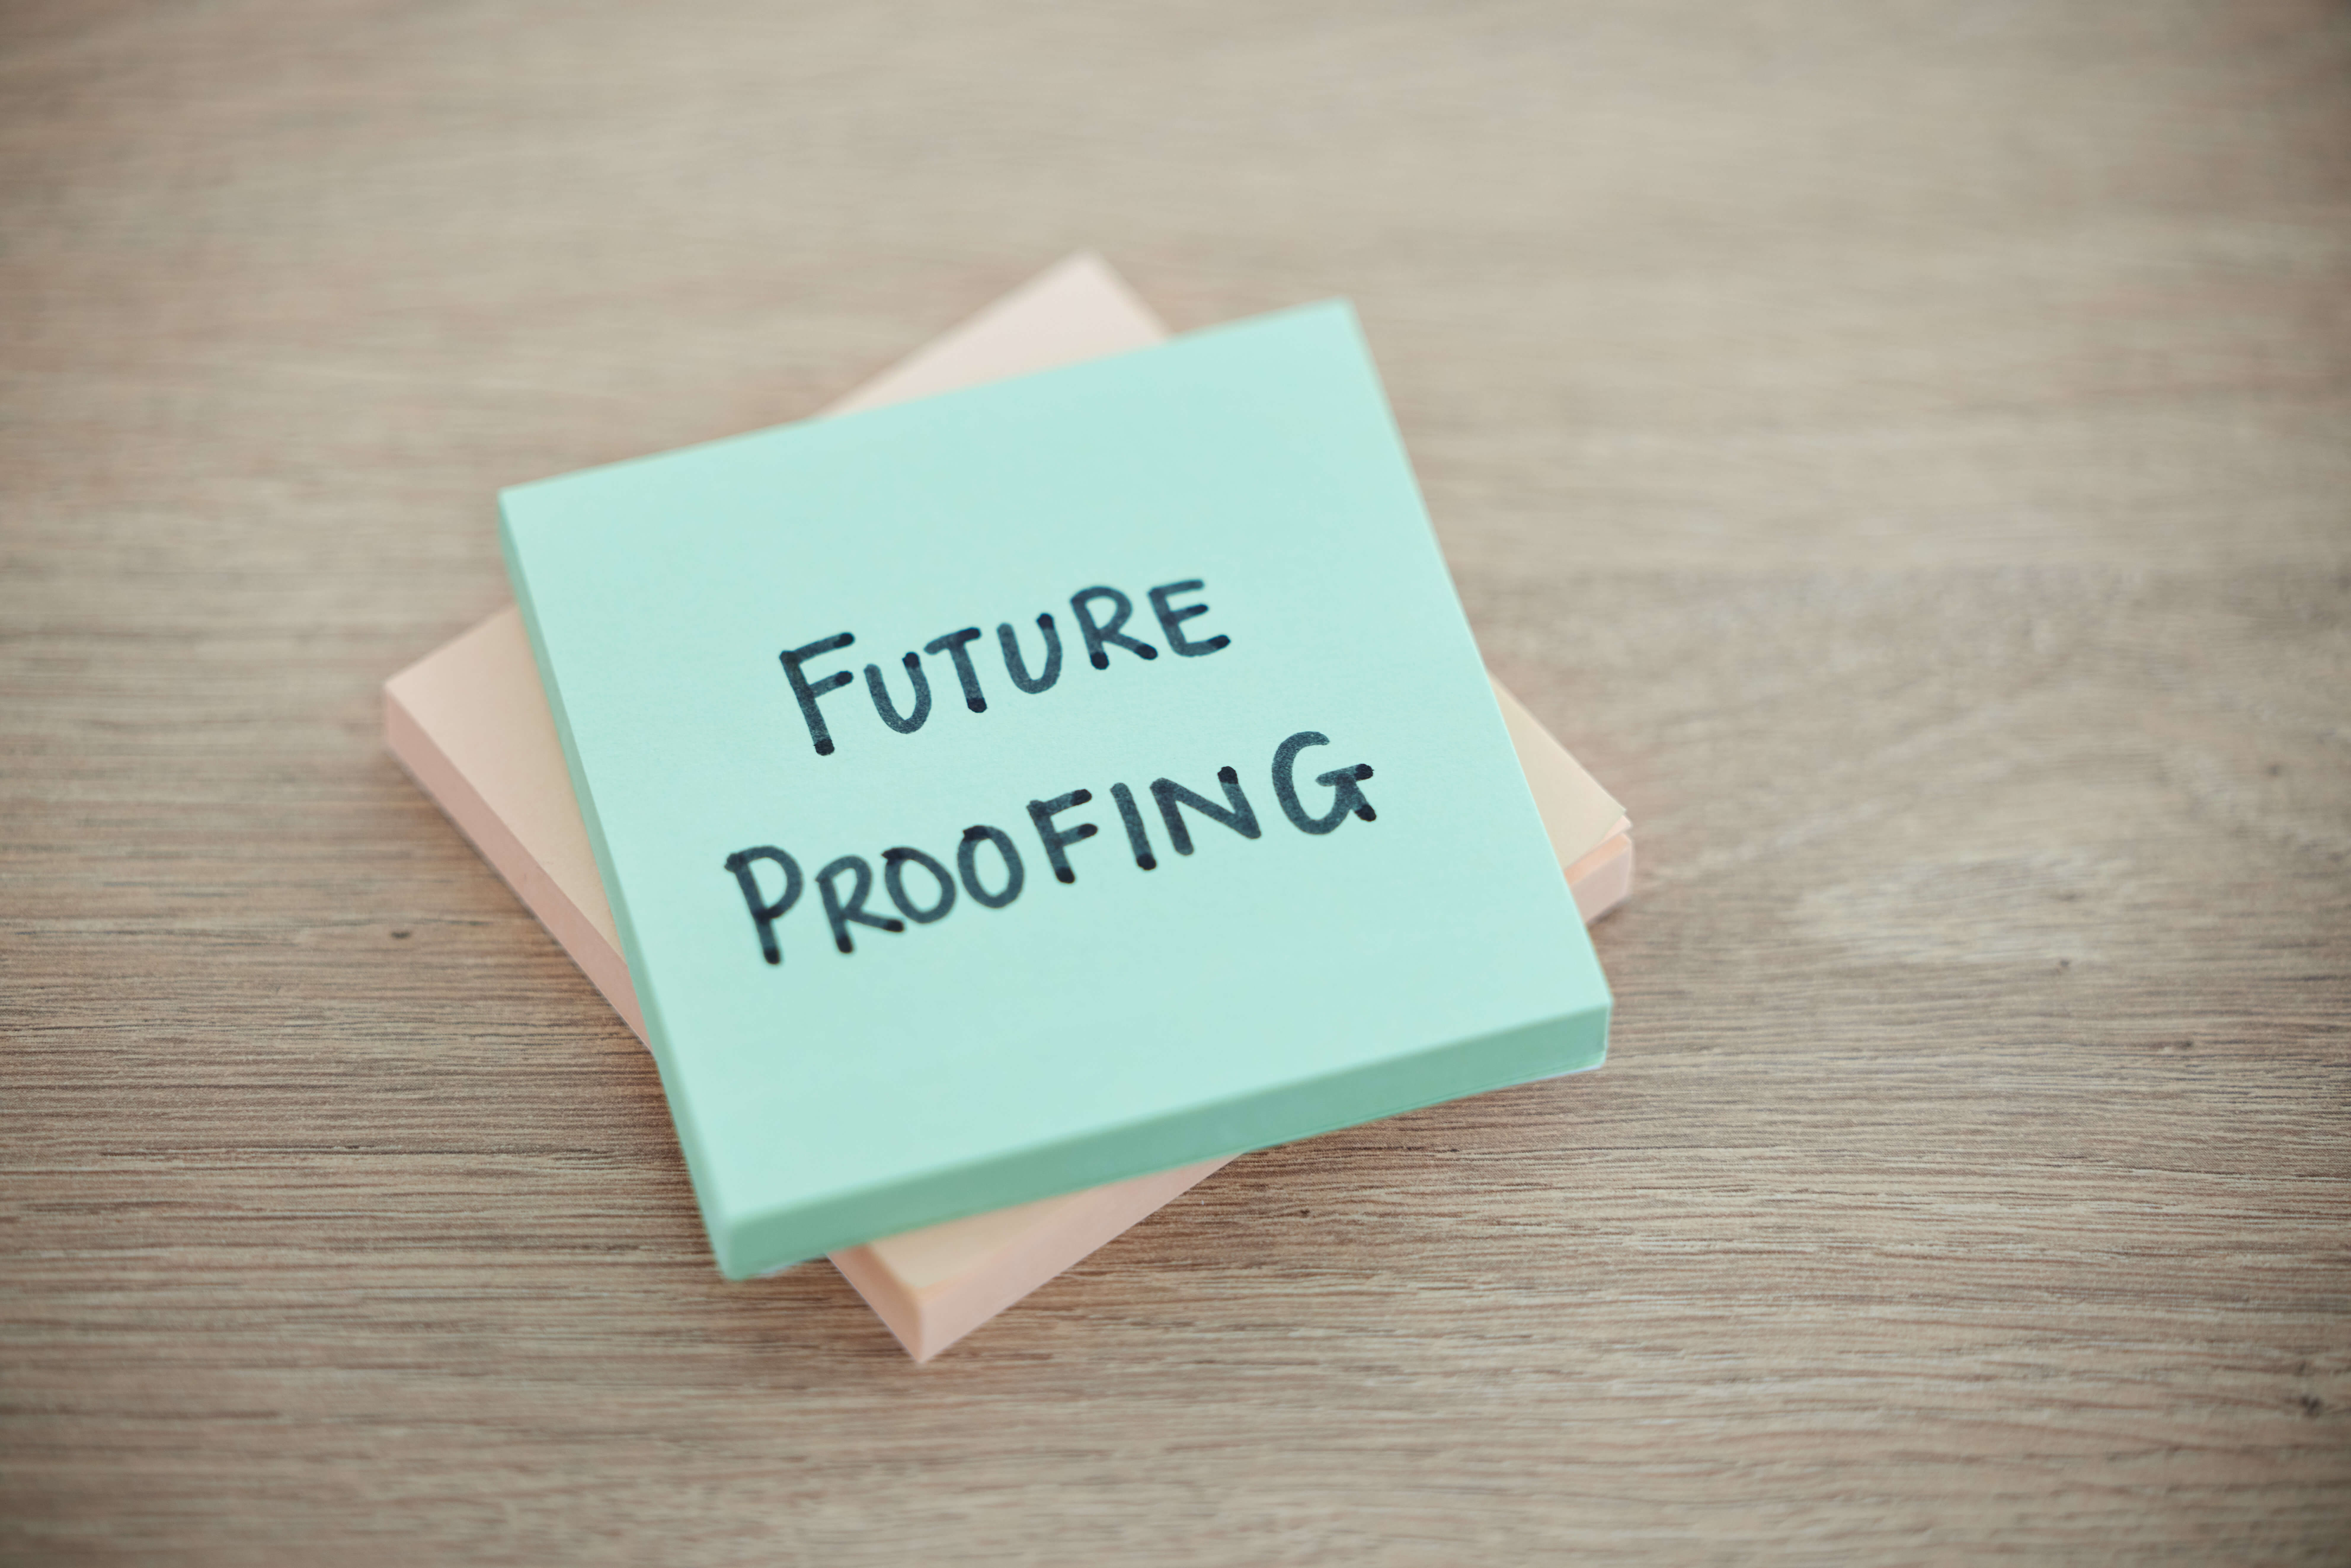 Future Proofing Written On A Sticky Note